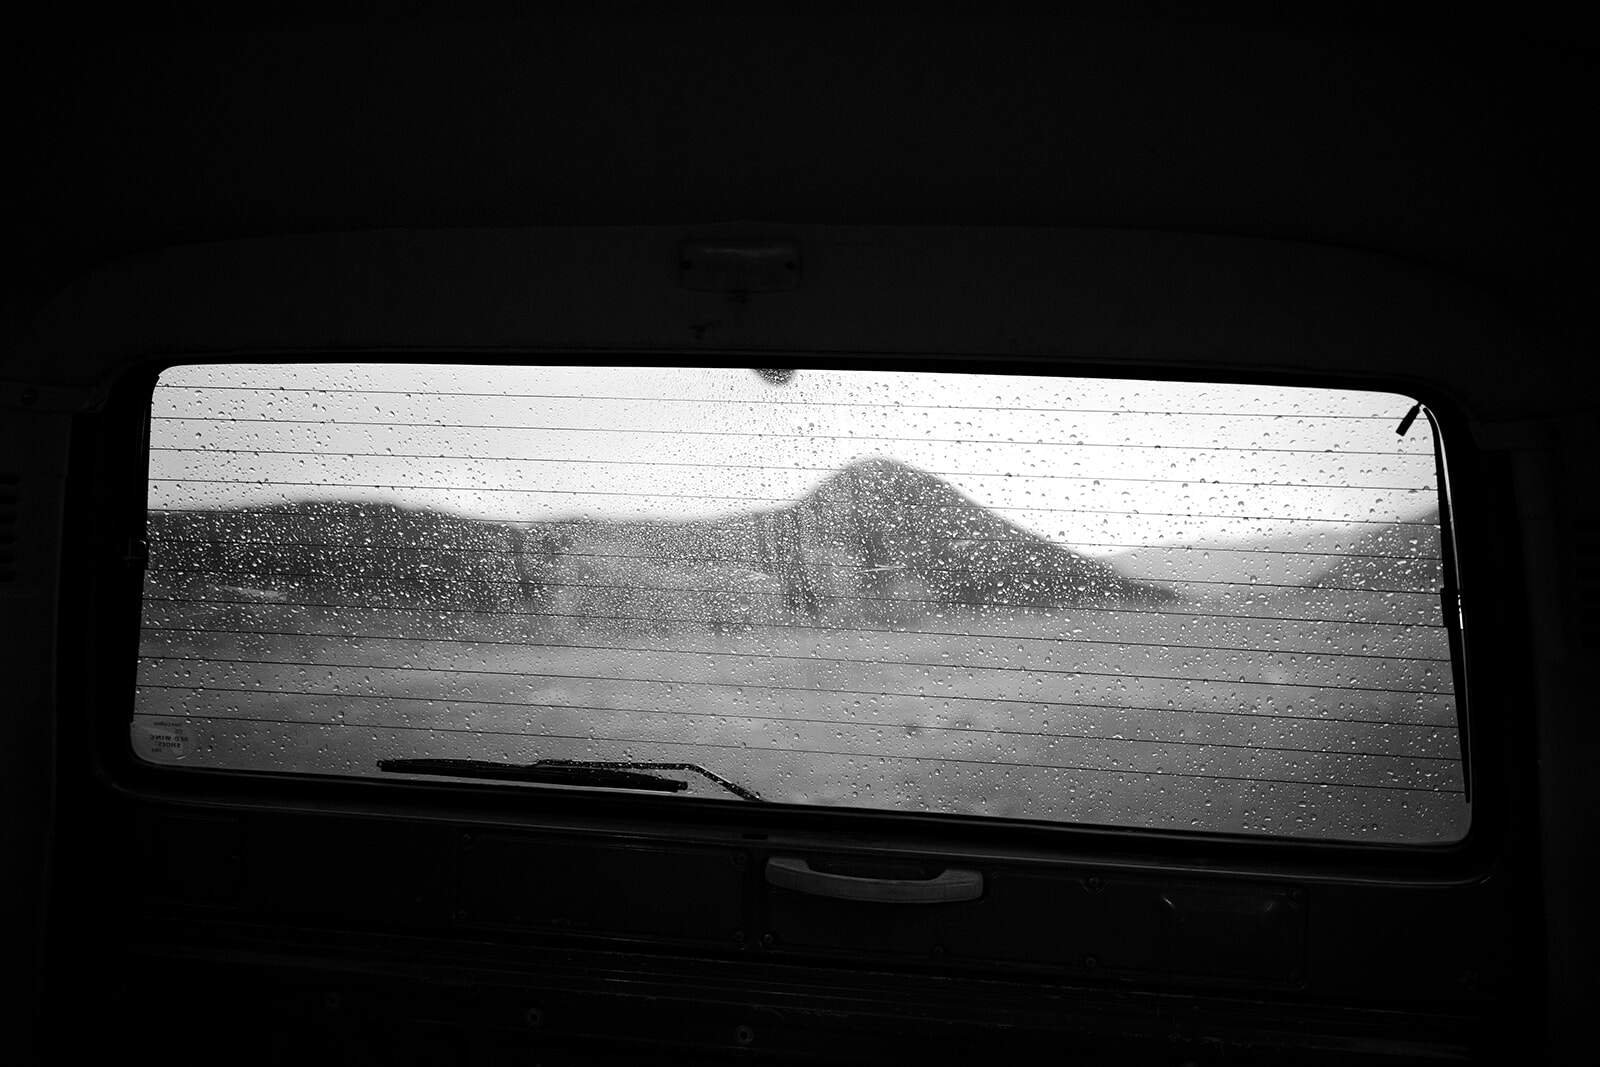 A view of mountains through the back of a rainy car windshield